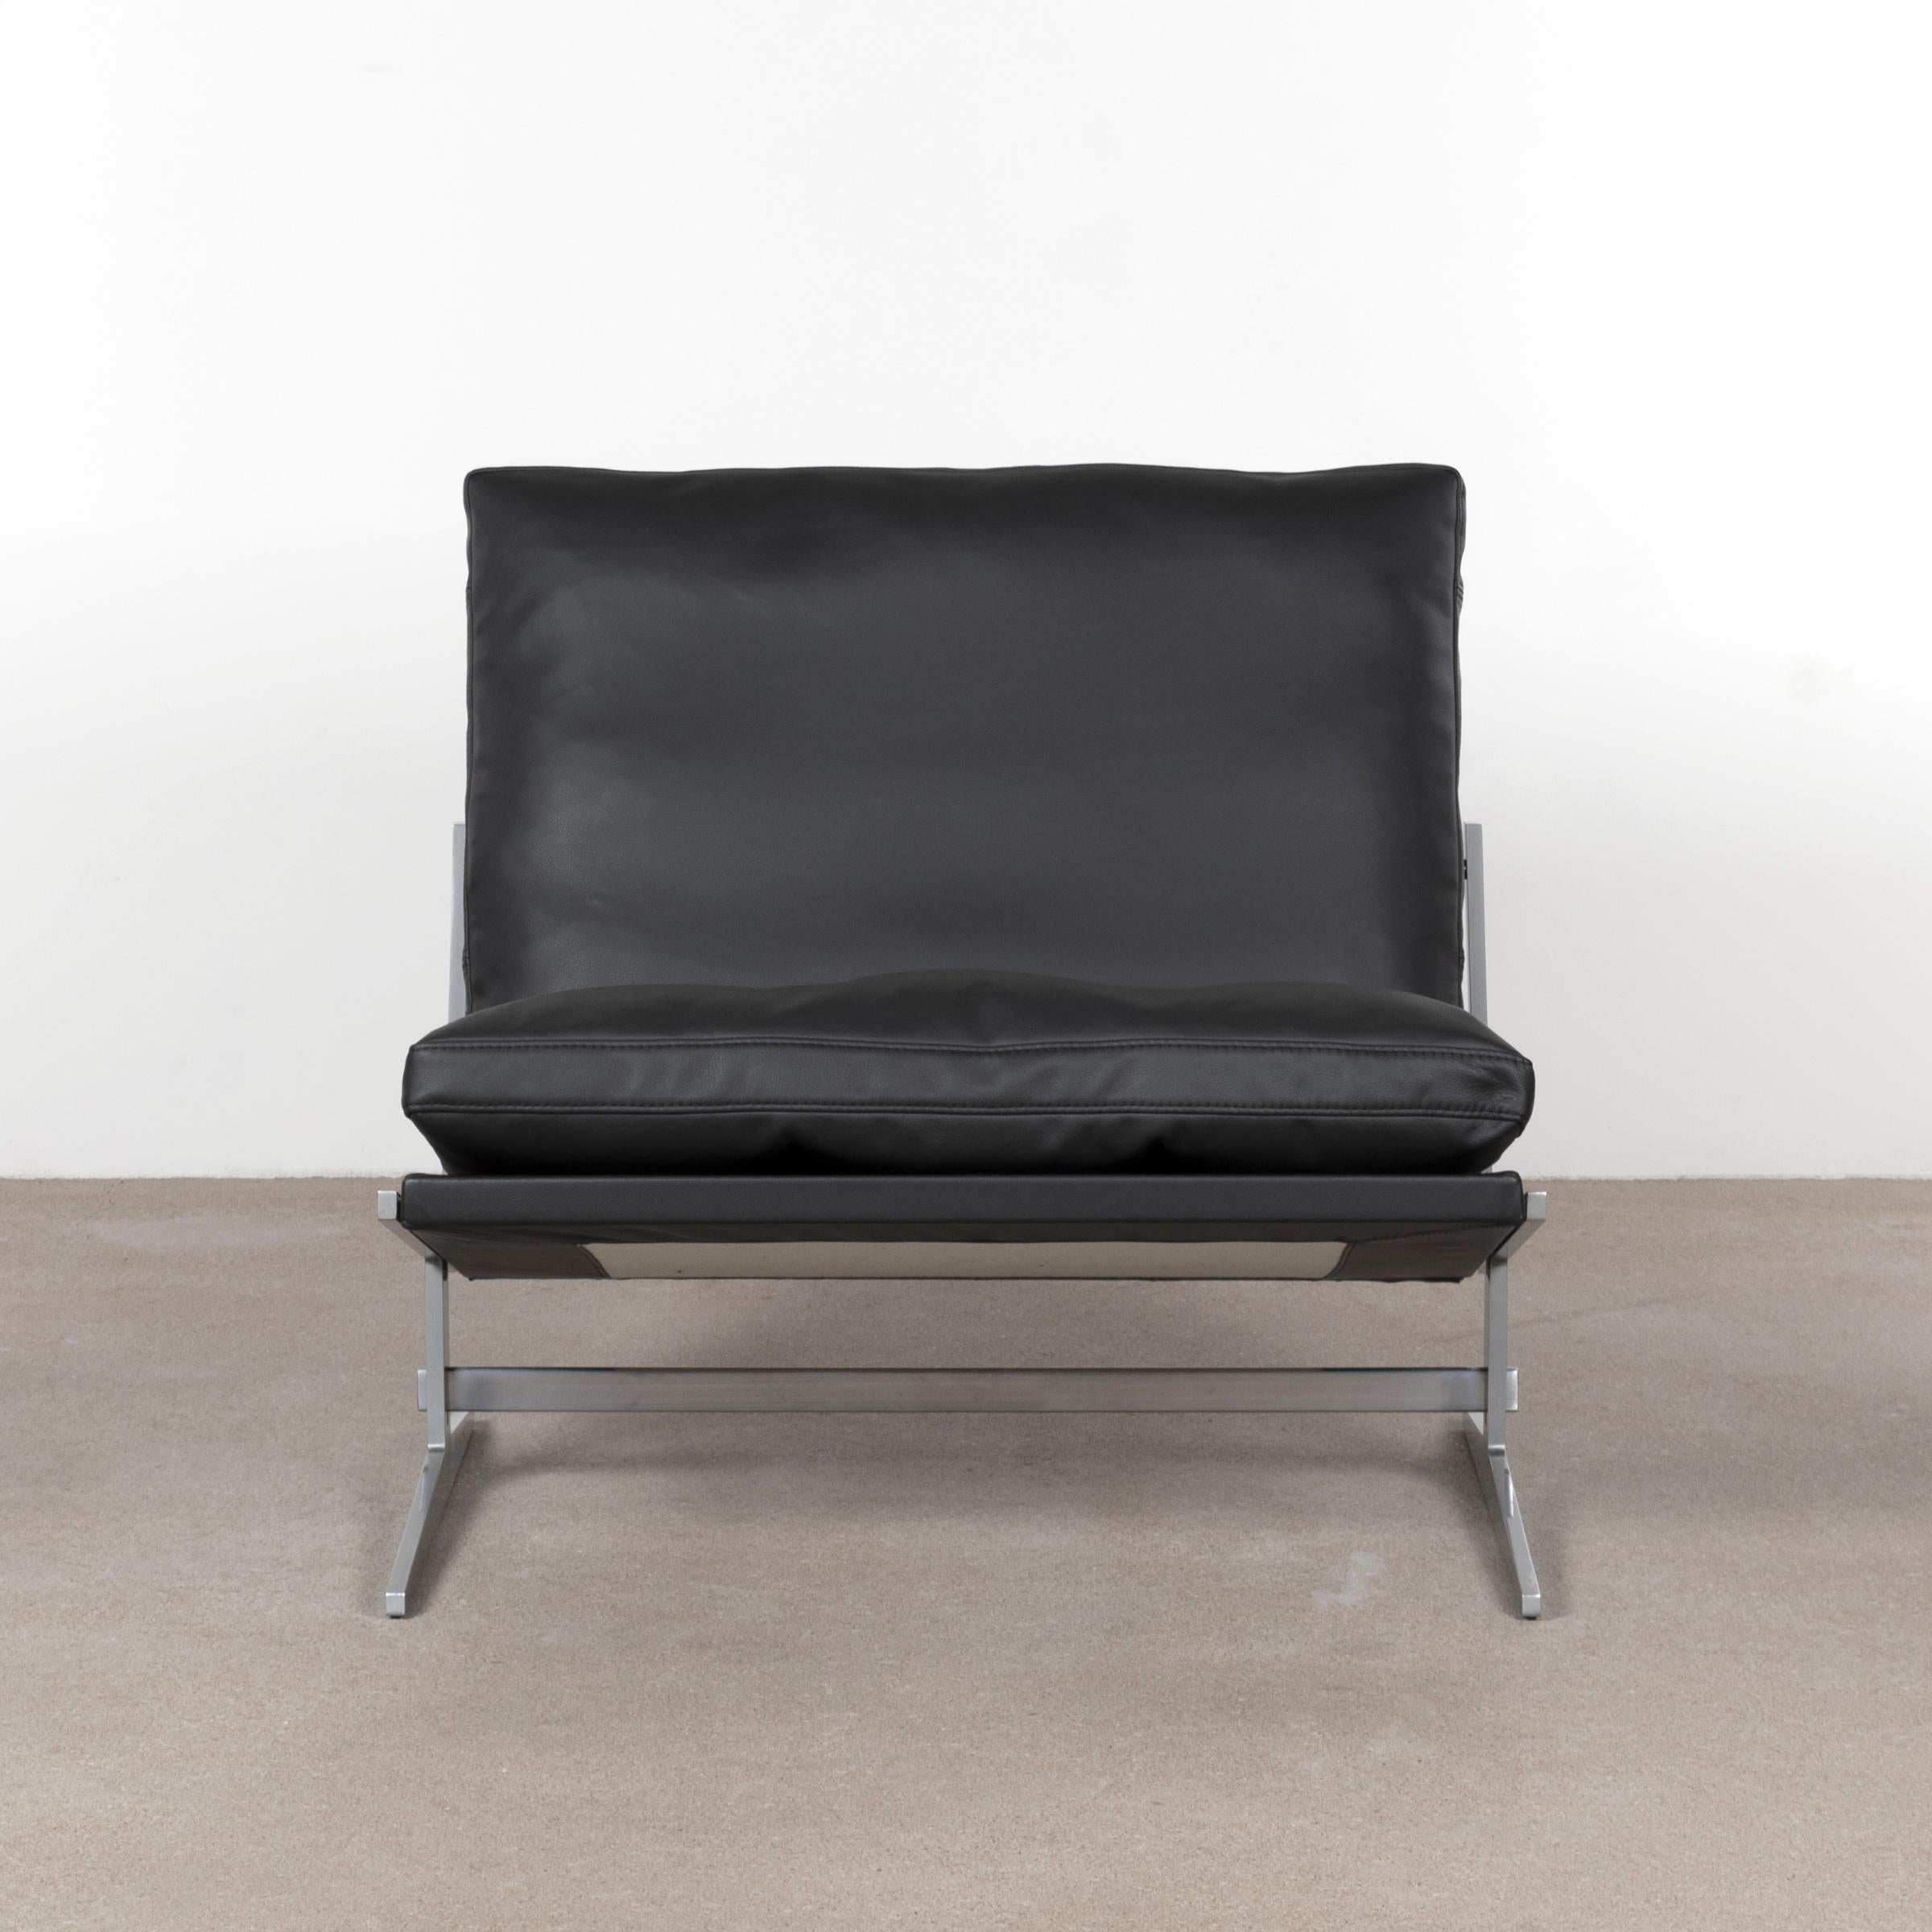 Beautiful slipper lounge chair by Jørgen Kastholm & Preben Fabricius model Bo-561 produced by Bo-Ex in Denmark. The chair is restored with a new upholstery in a very dark green leather. The frame is polished and the cushions are re-filled with new